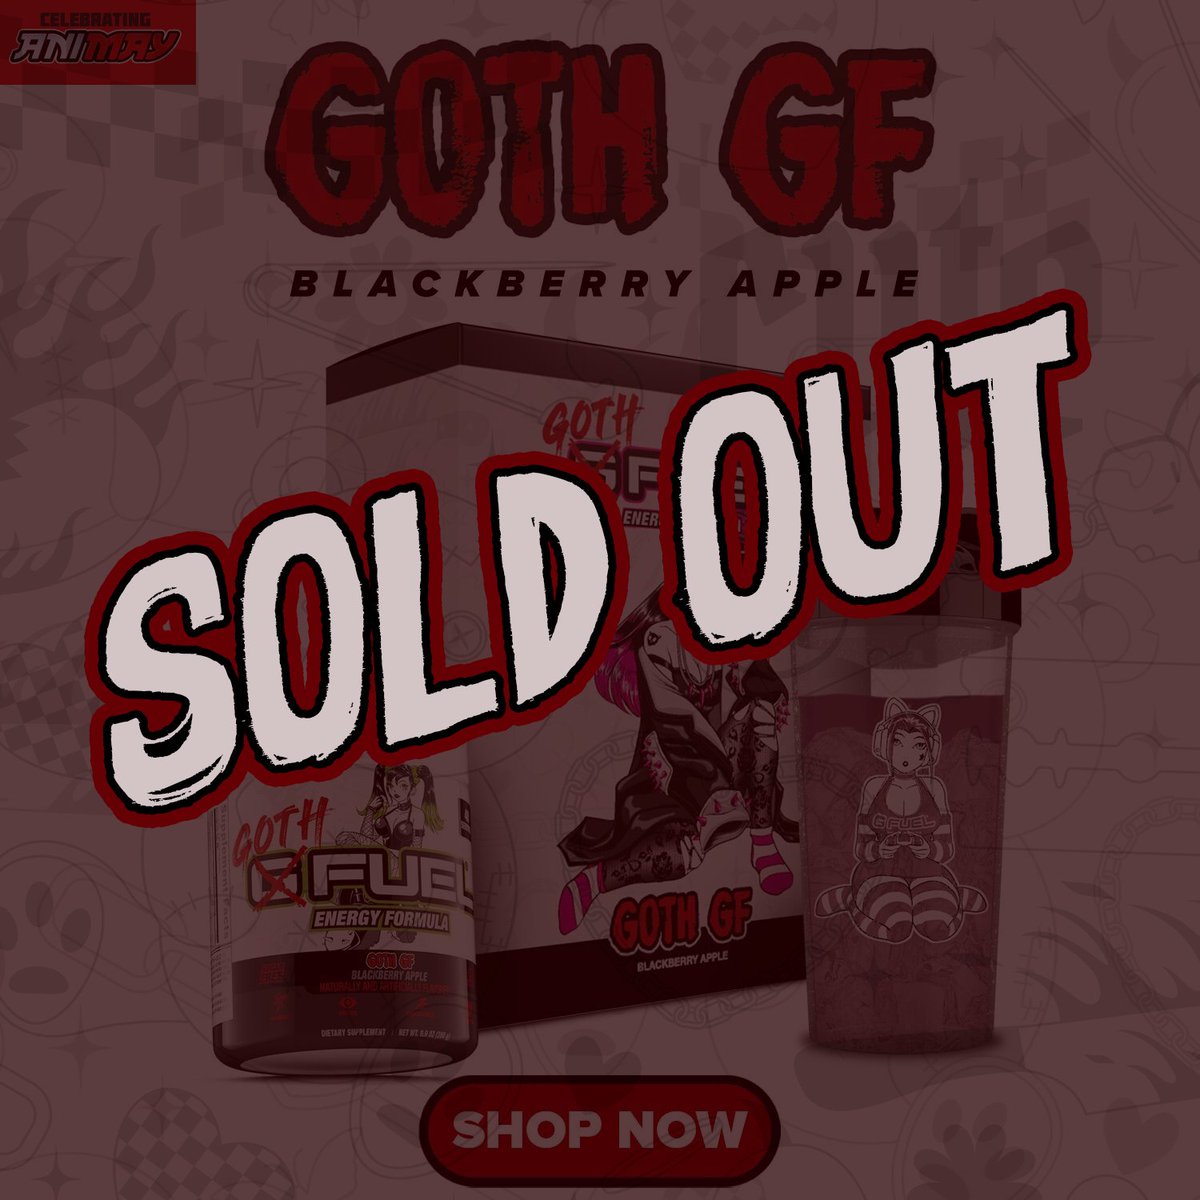 🚨 GOTH GIRLFRIEND COLLECTOR'S BOXES ARE NOW OFFICIALLY SOLD OUT! THE LOVE & SUPPORT HAS BEEN UNREAL! 🥰 💋 TUBS ARE STILL AVAILABLE AT GFUEL.com 🗿